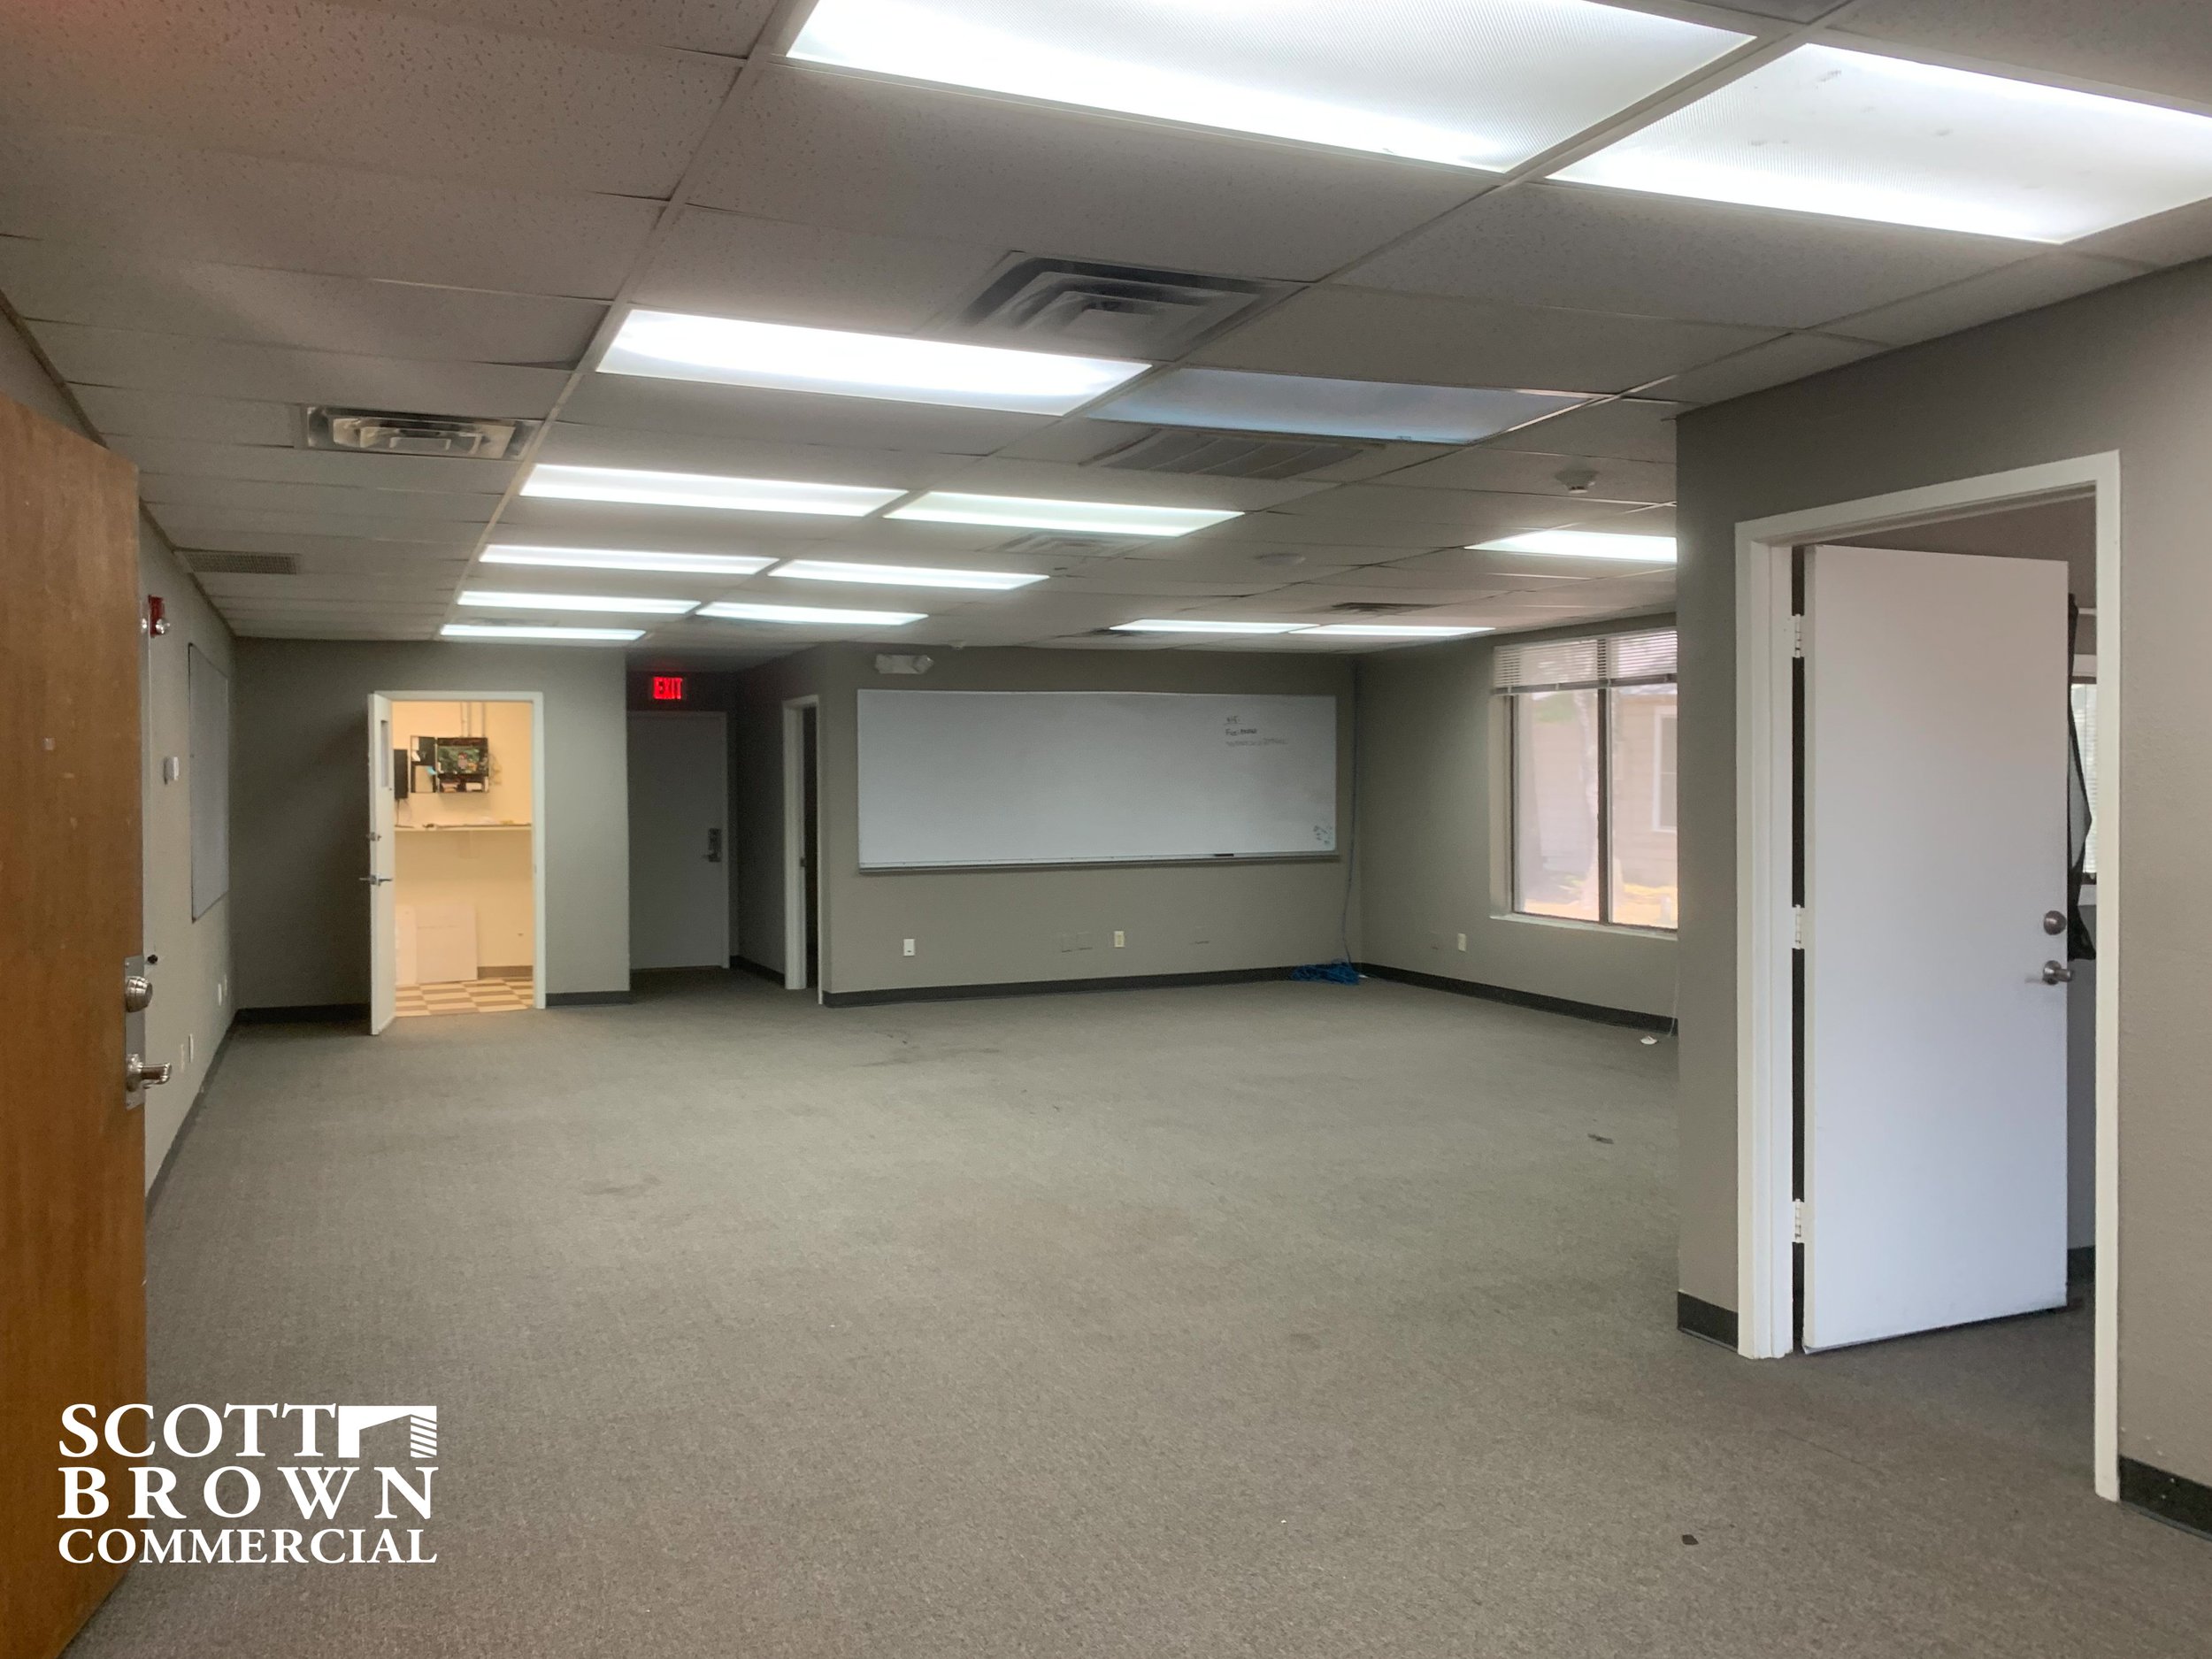  large open office space within 400 S Carroll Boulevard 